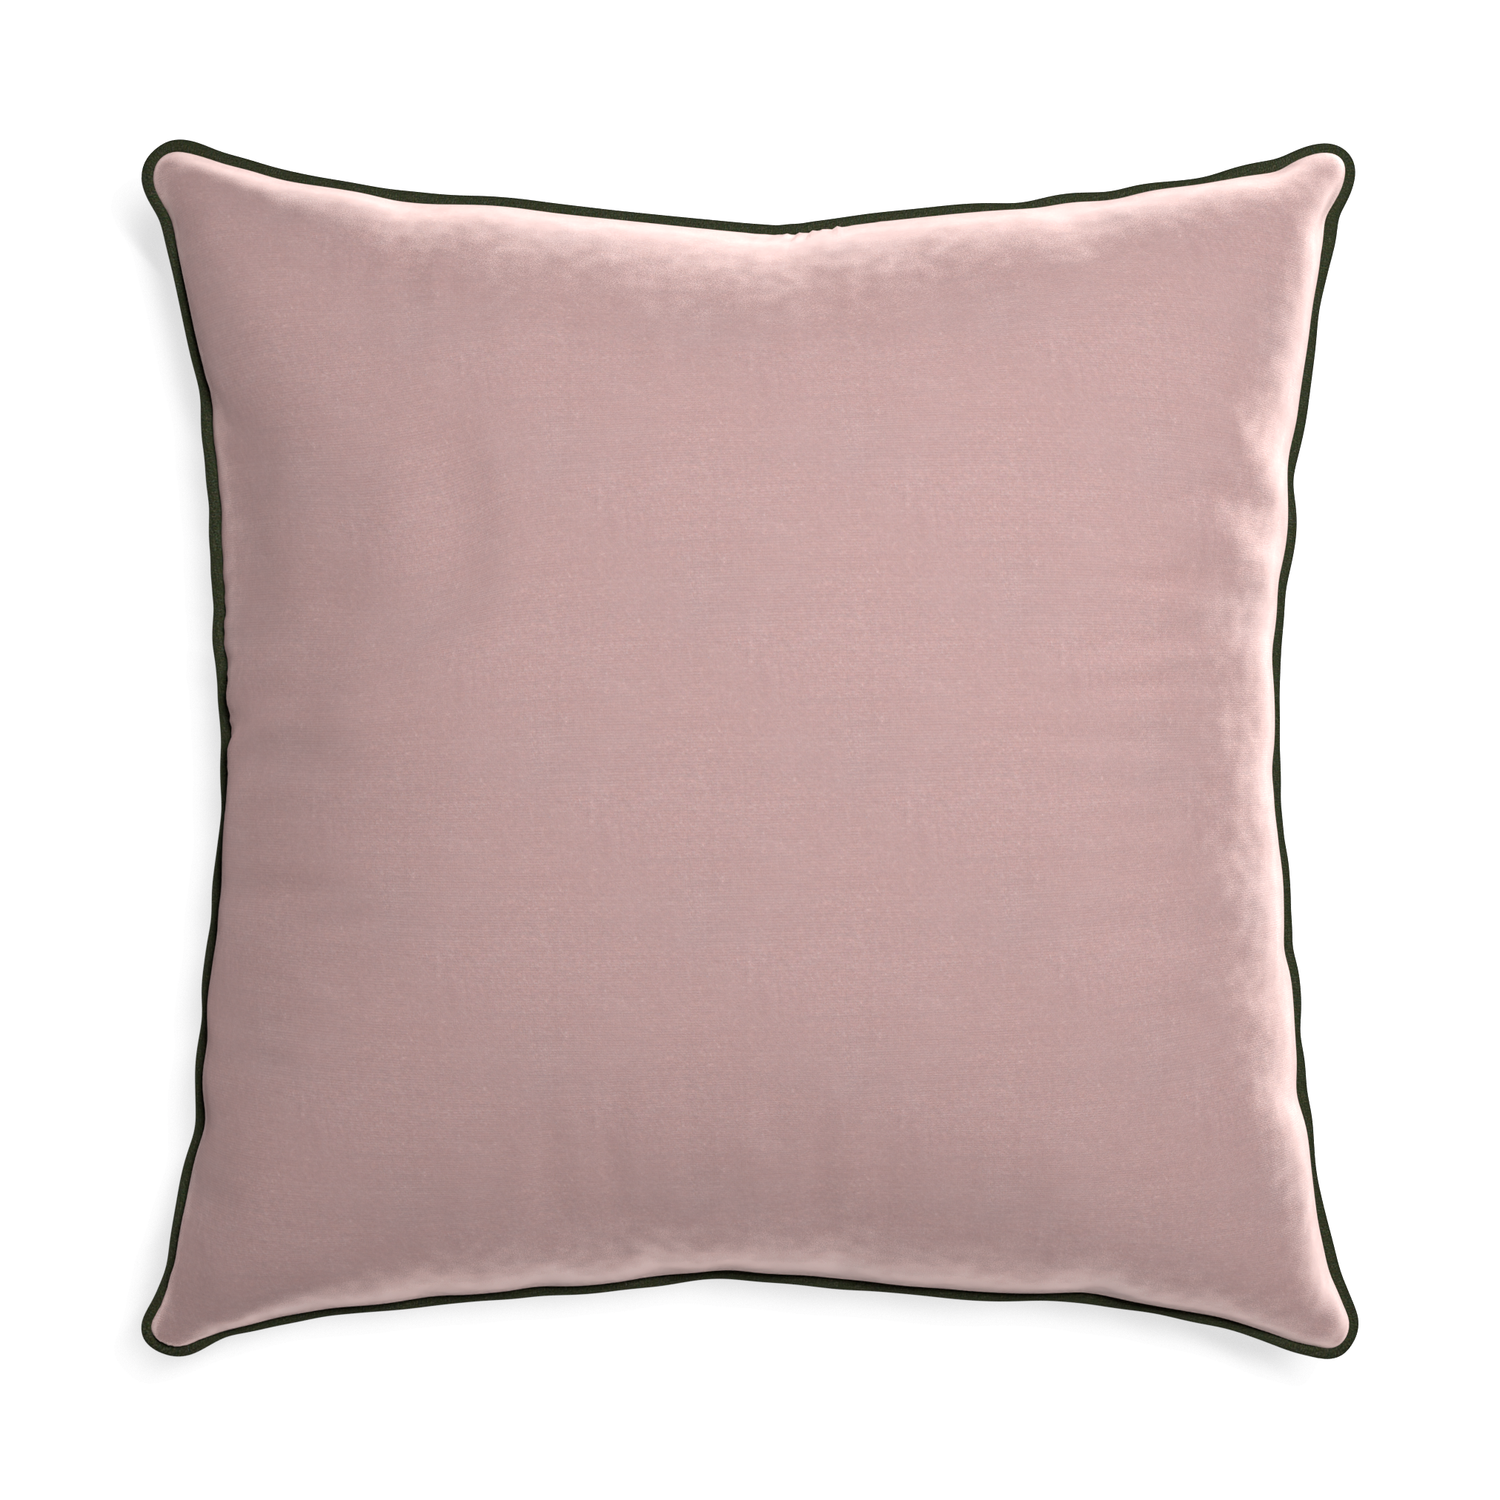 square mauve velvet pillow with fern green piping